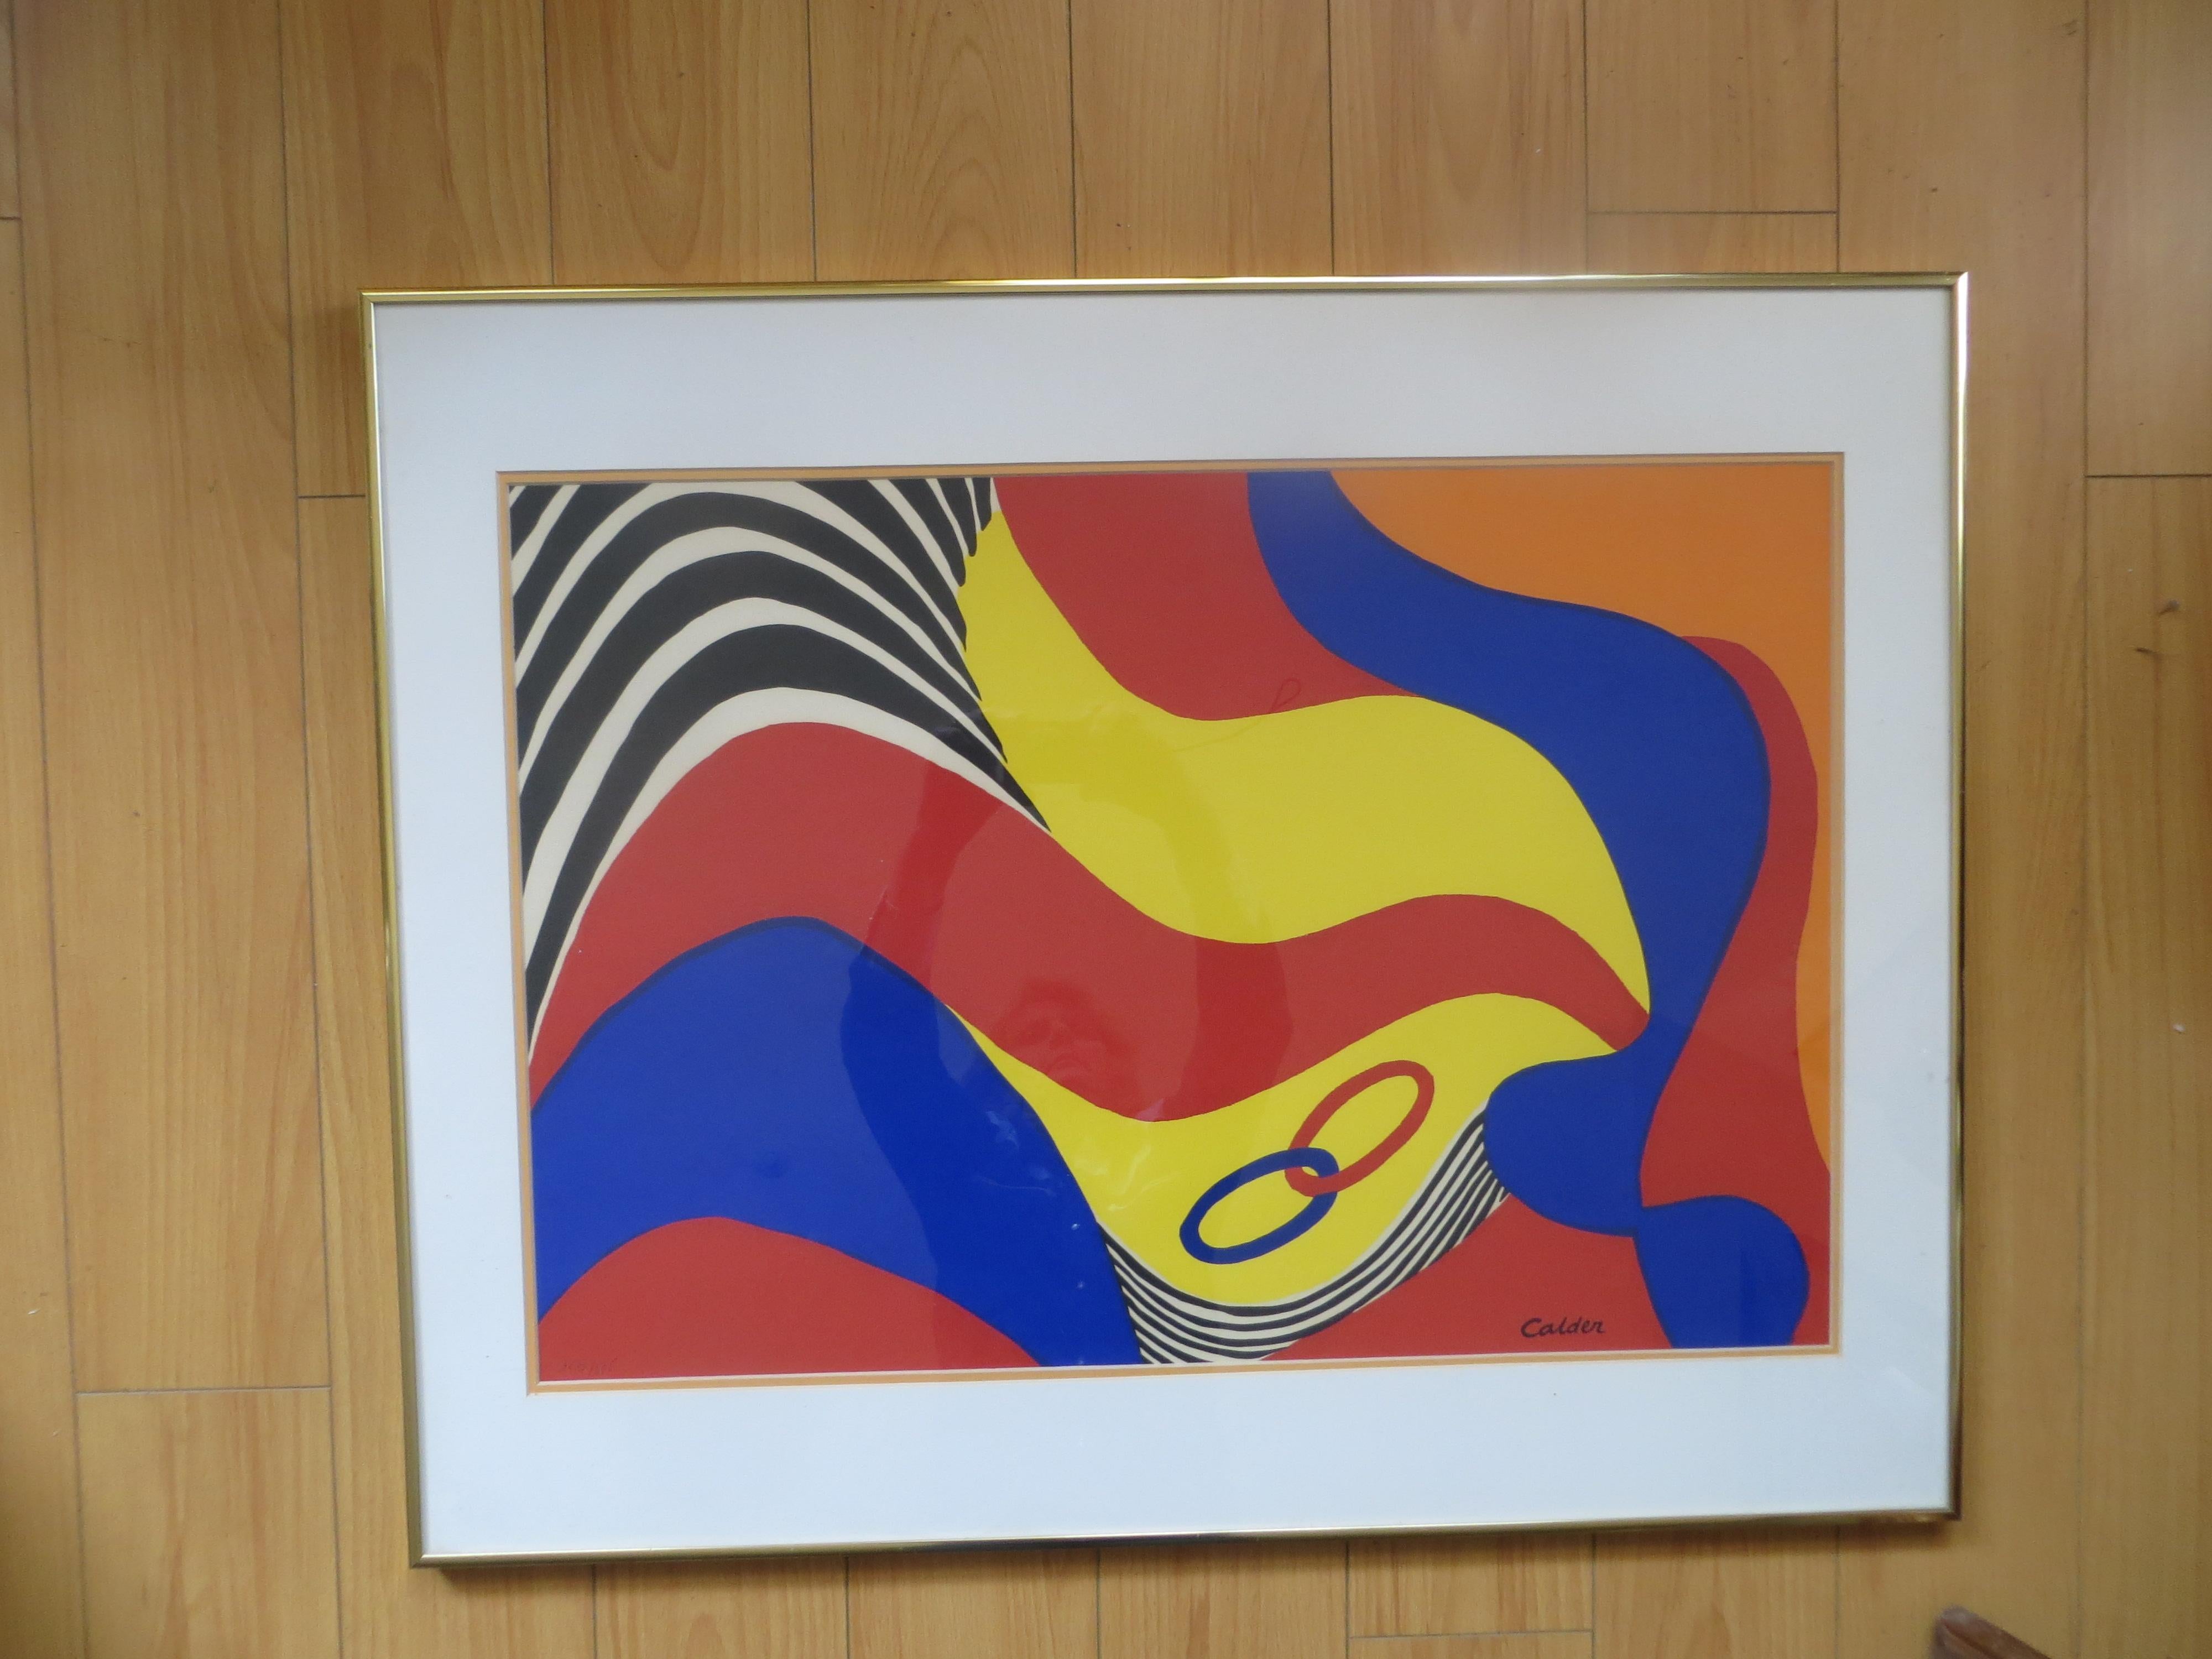  CalderAbstract lithograph Flying colors 1975 limited Edition  For Sale 5